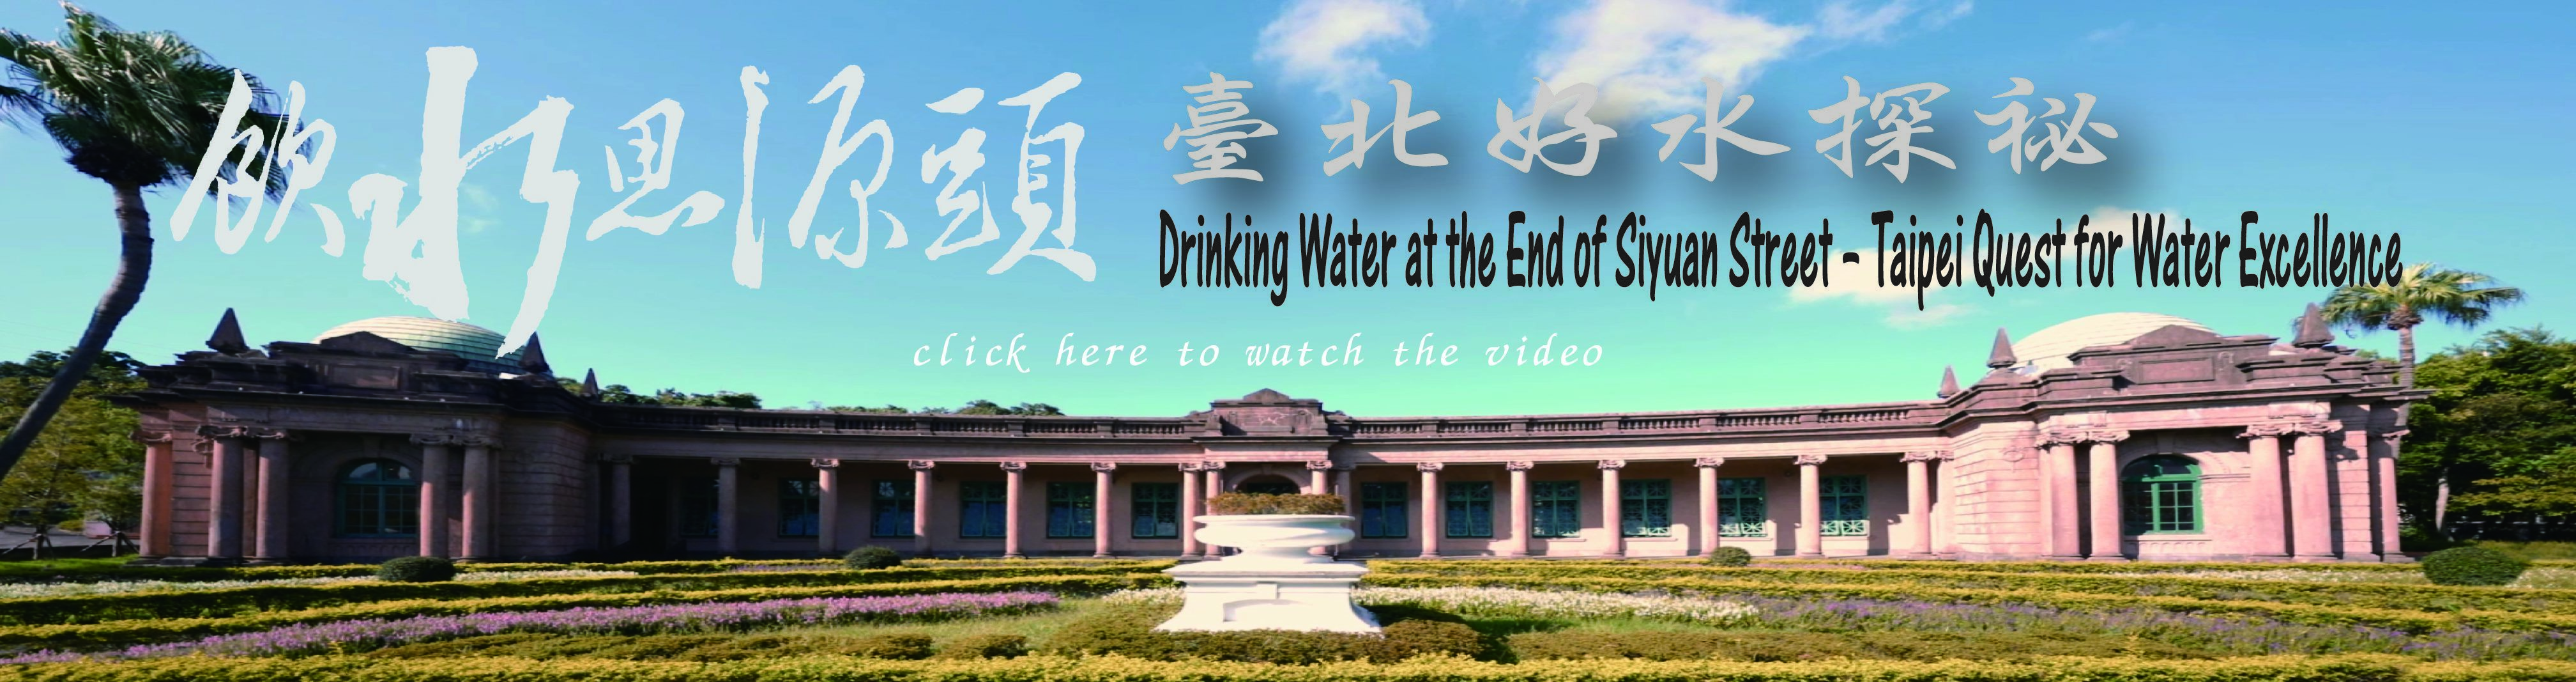 Drinking Water at the End of Siyuan Street - Taipei's Quest for Water Excellence